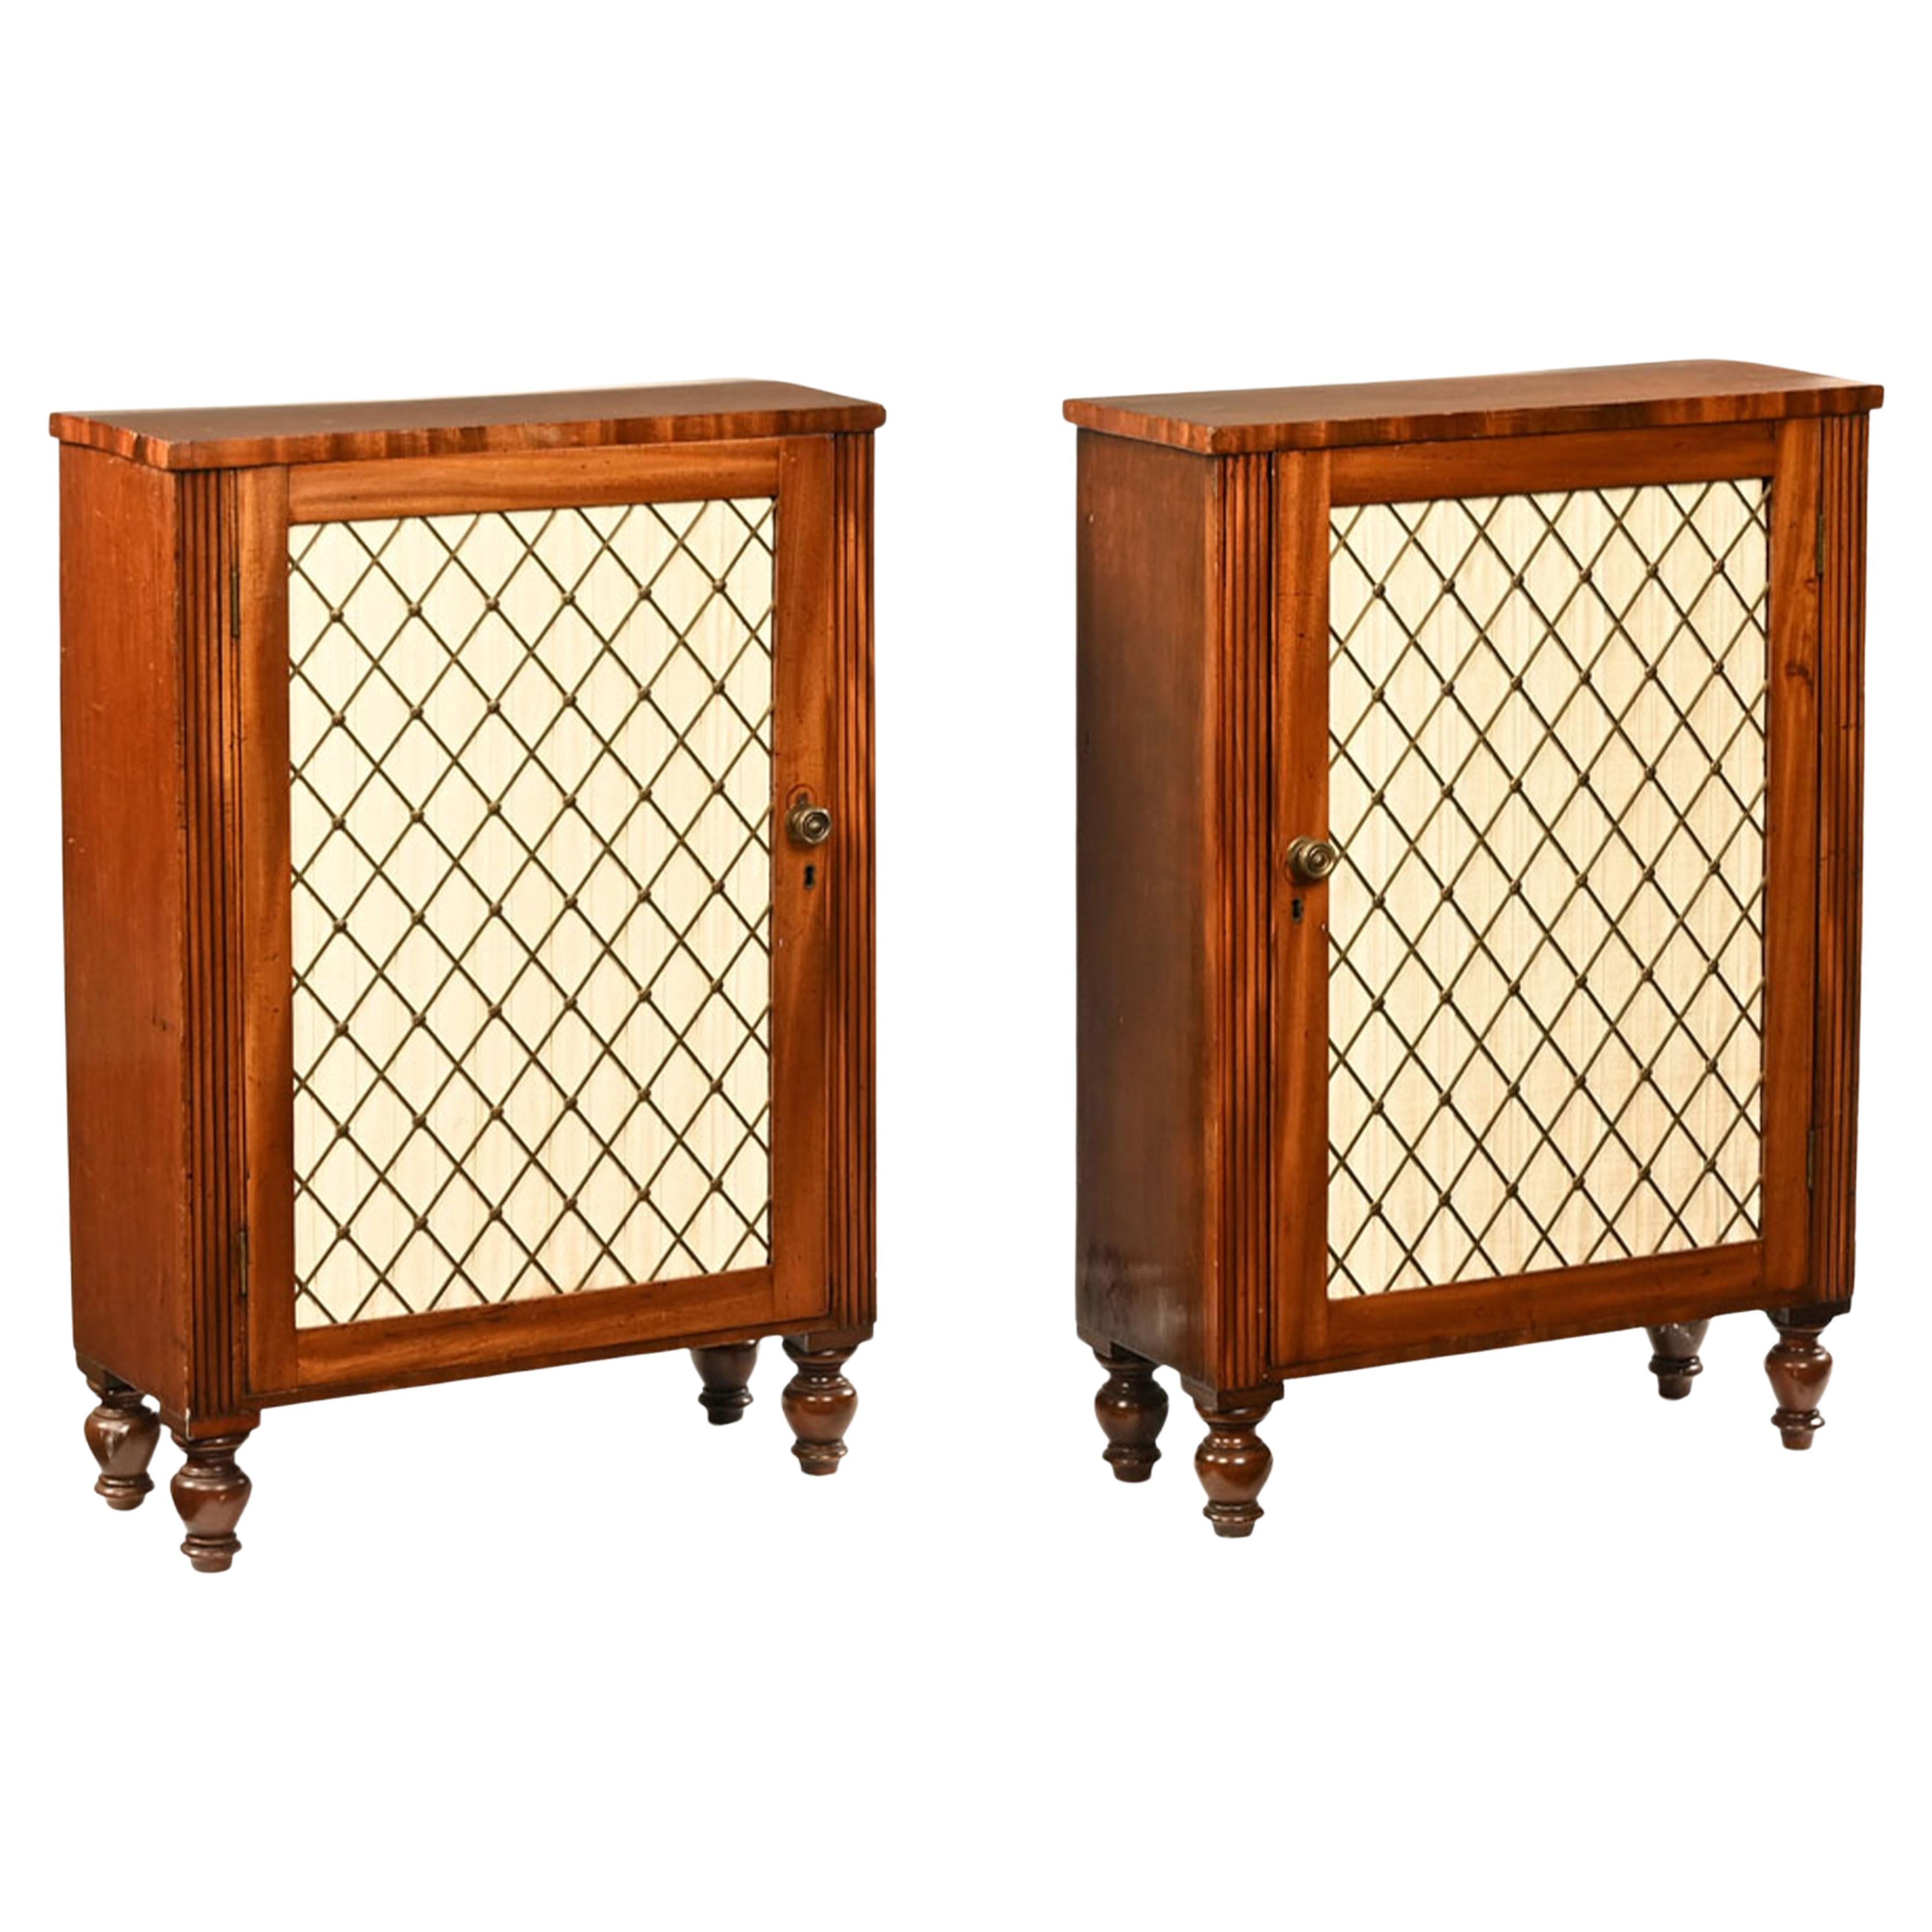 British Rare Pair of Regency Period Mahogany Side Cabinets with Brass Lattice Fronts For Sale